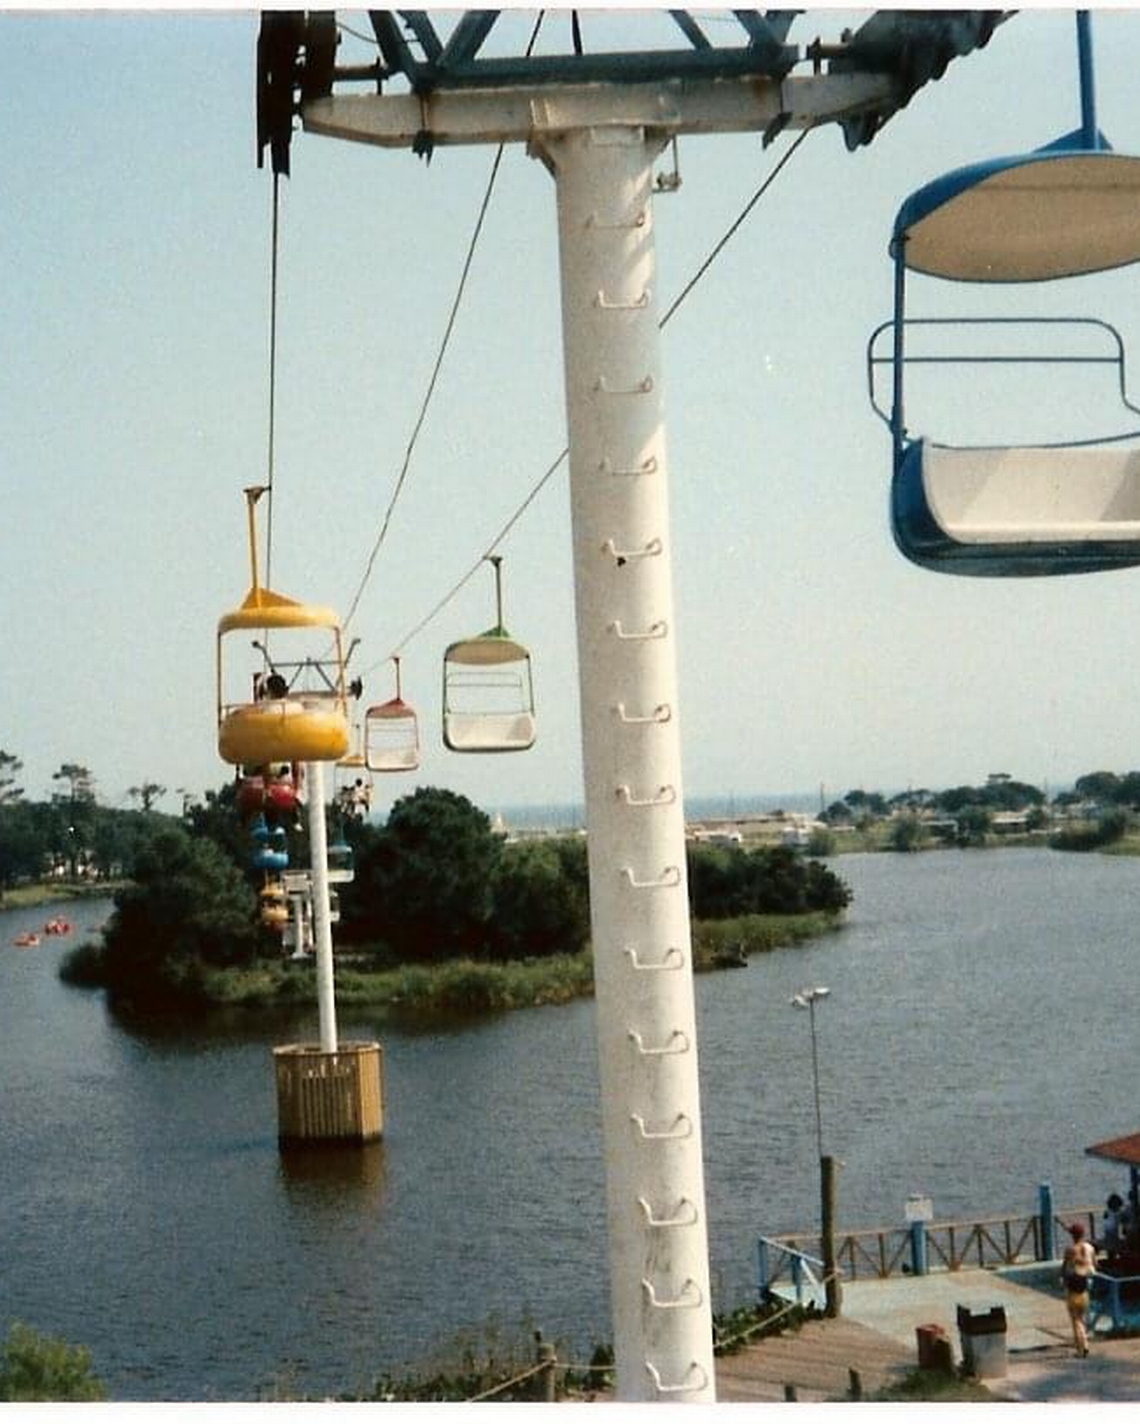 The chair lift operates at the former Magic Harbor amusement park, which was taken over by Lakewood Camping Resort in the 1980s.